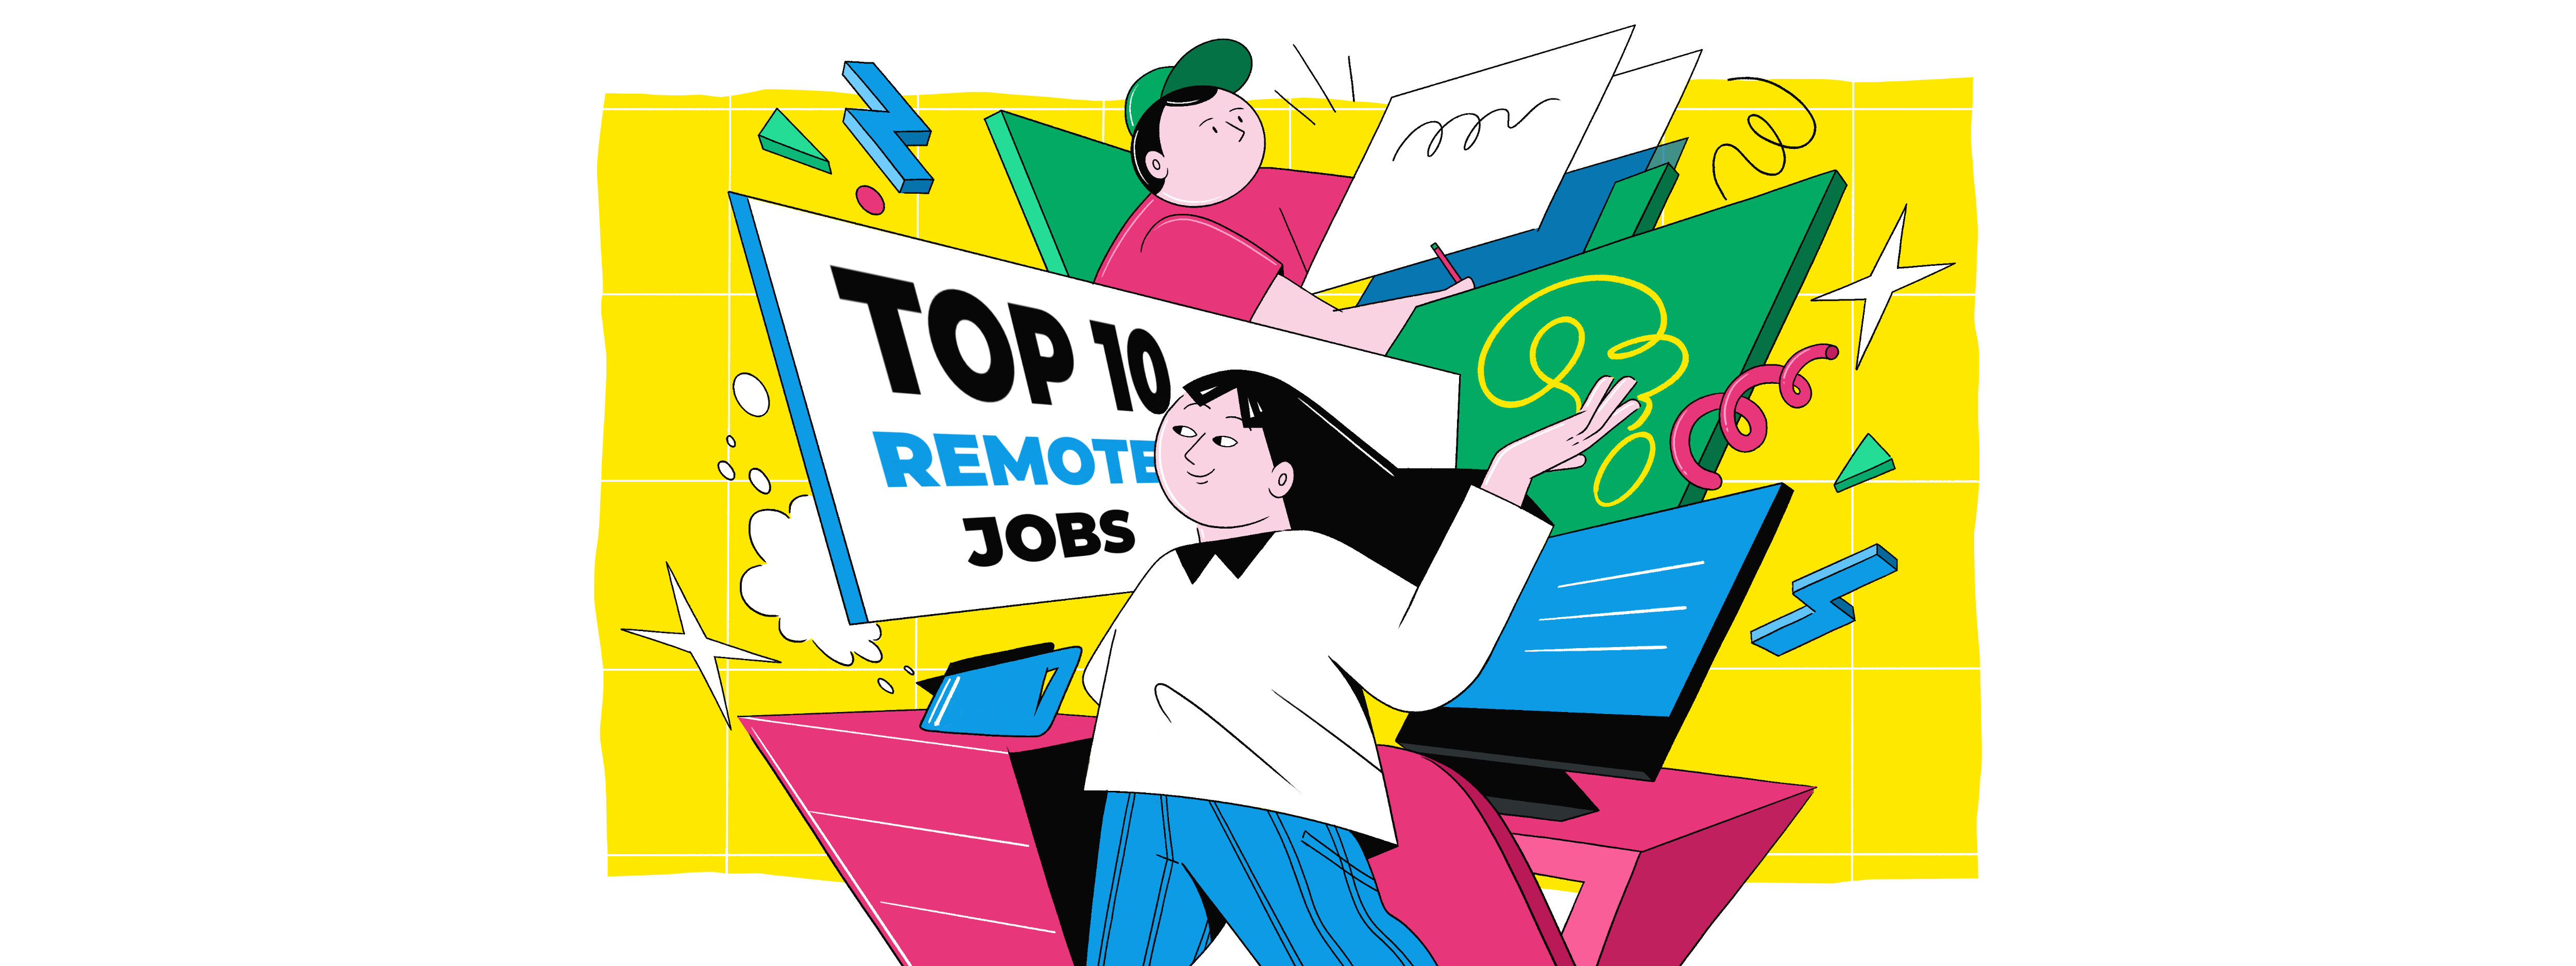 Top 10 remote jobs for 2020